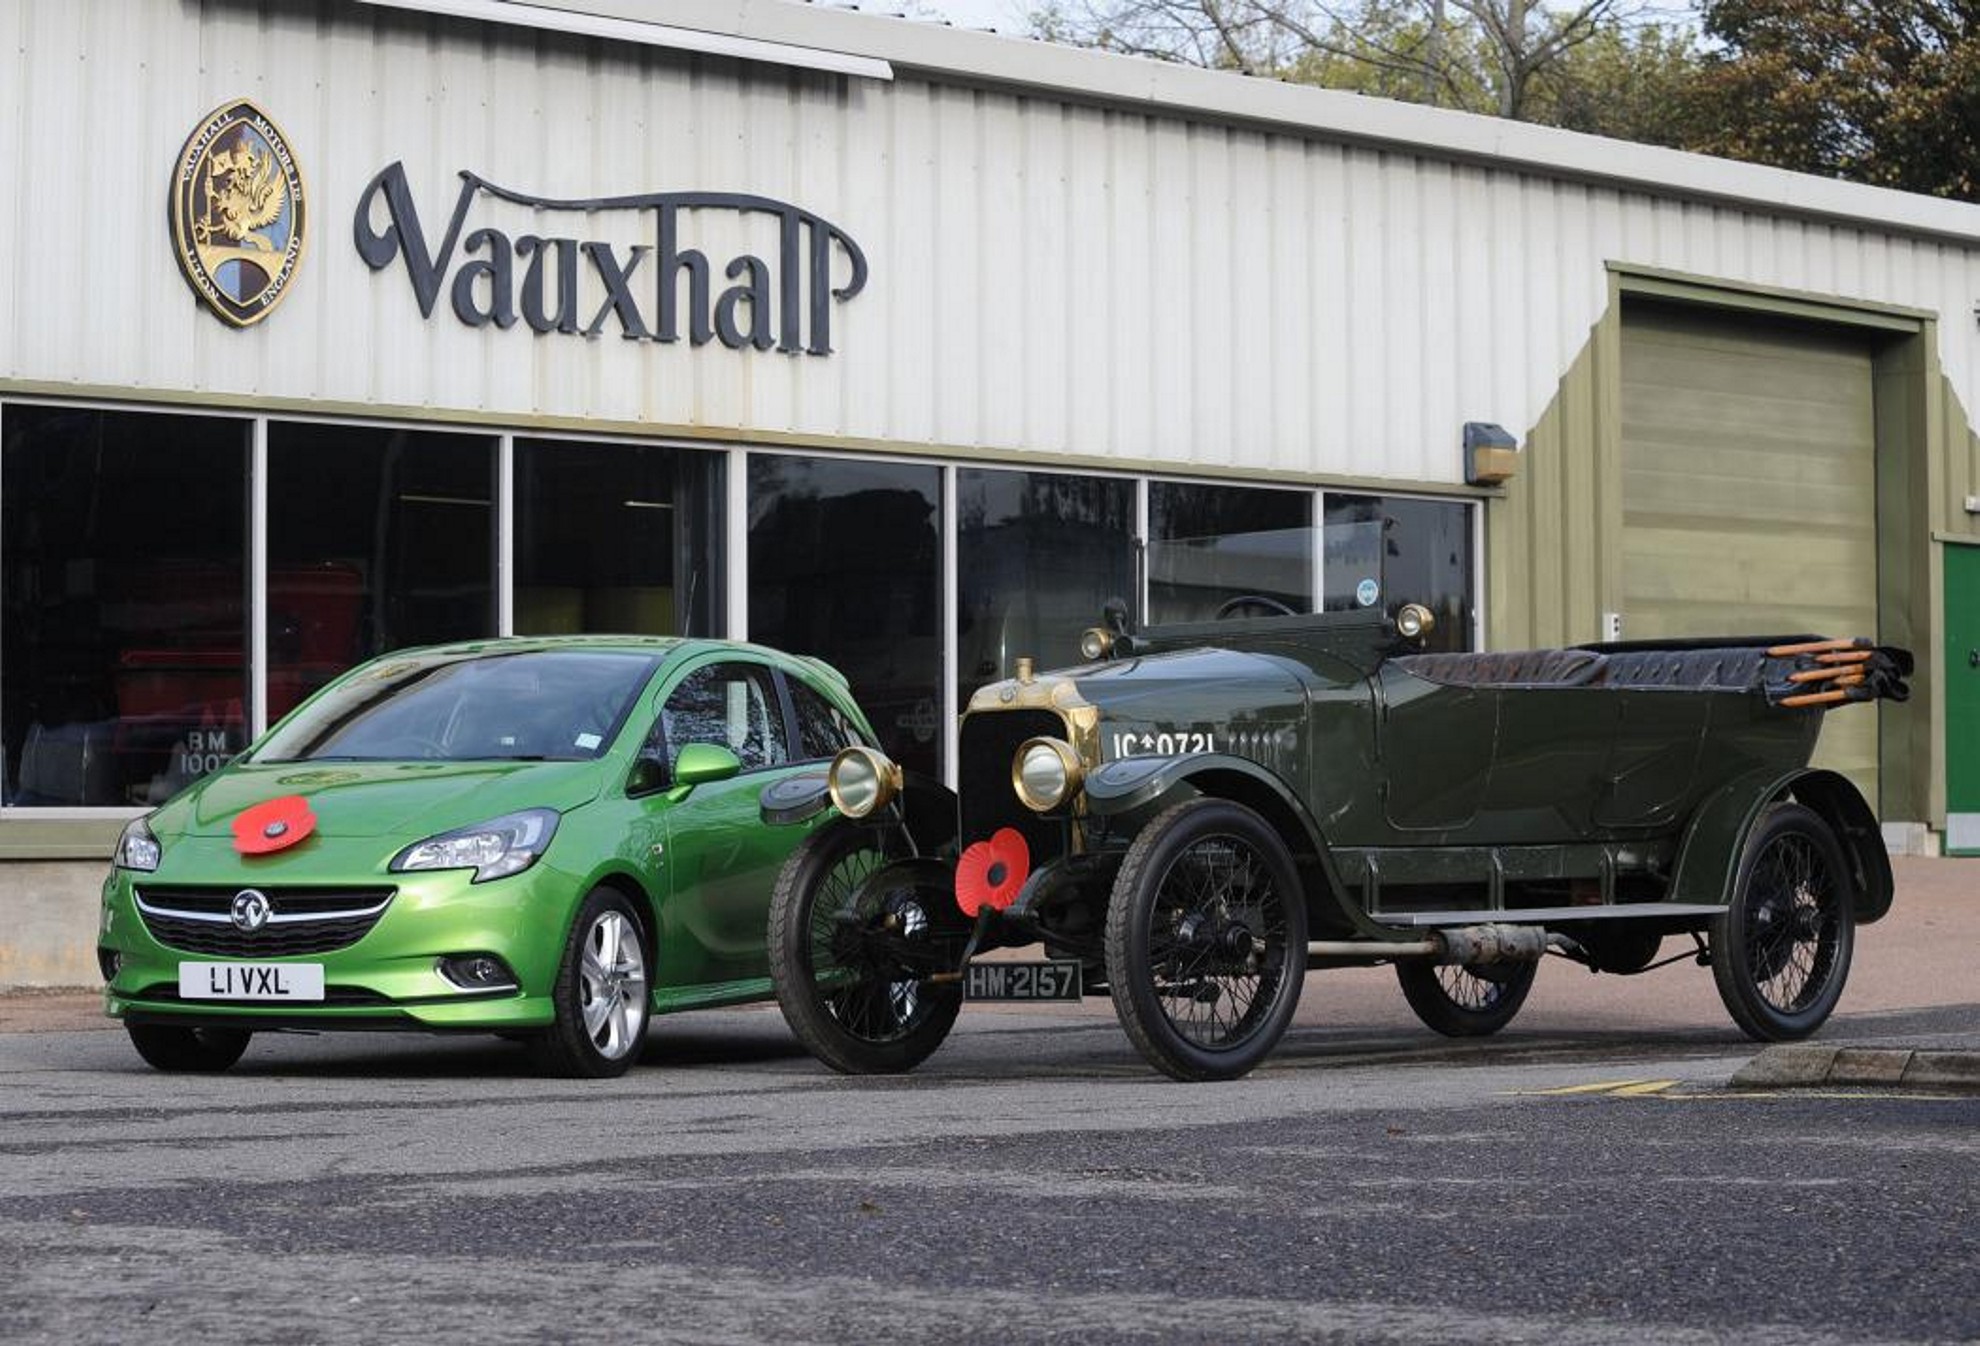 VAUXHALL HONOURS WAR DEAD WITH REMEMBRANCE PHOTOGRAPHY